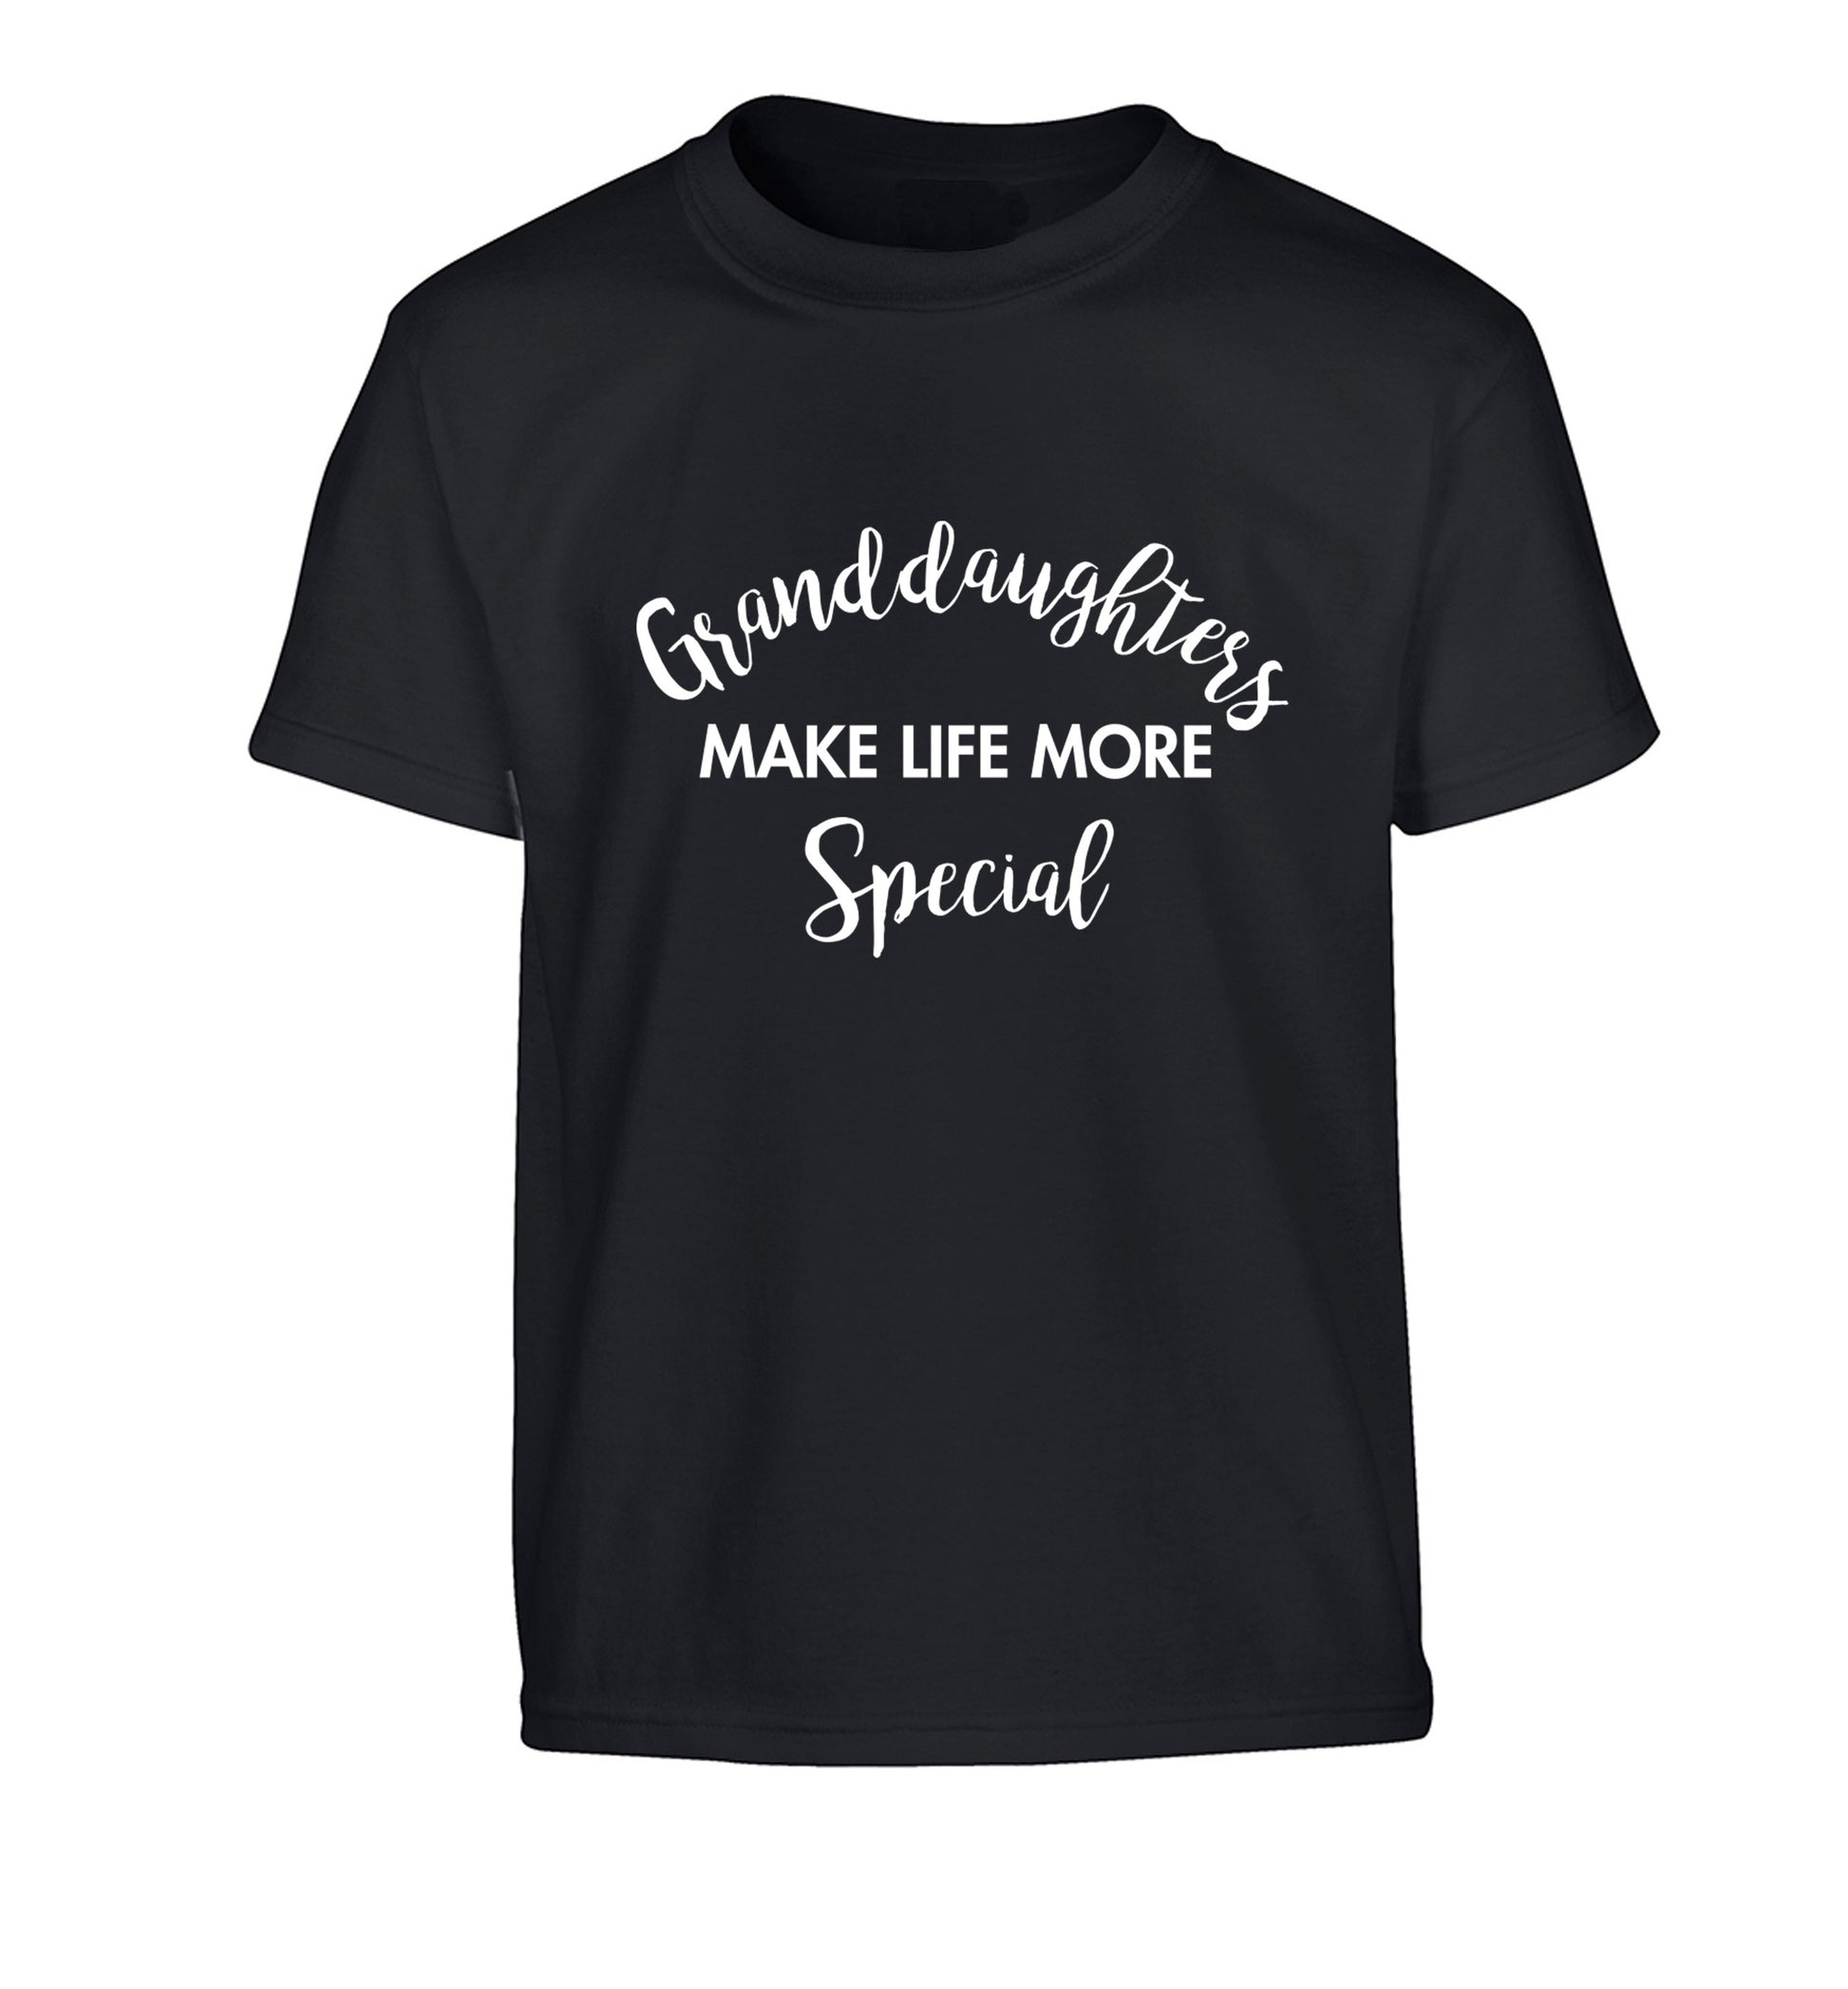 Granddaughters make life more special Children's black Tshirt 12-14 Years